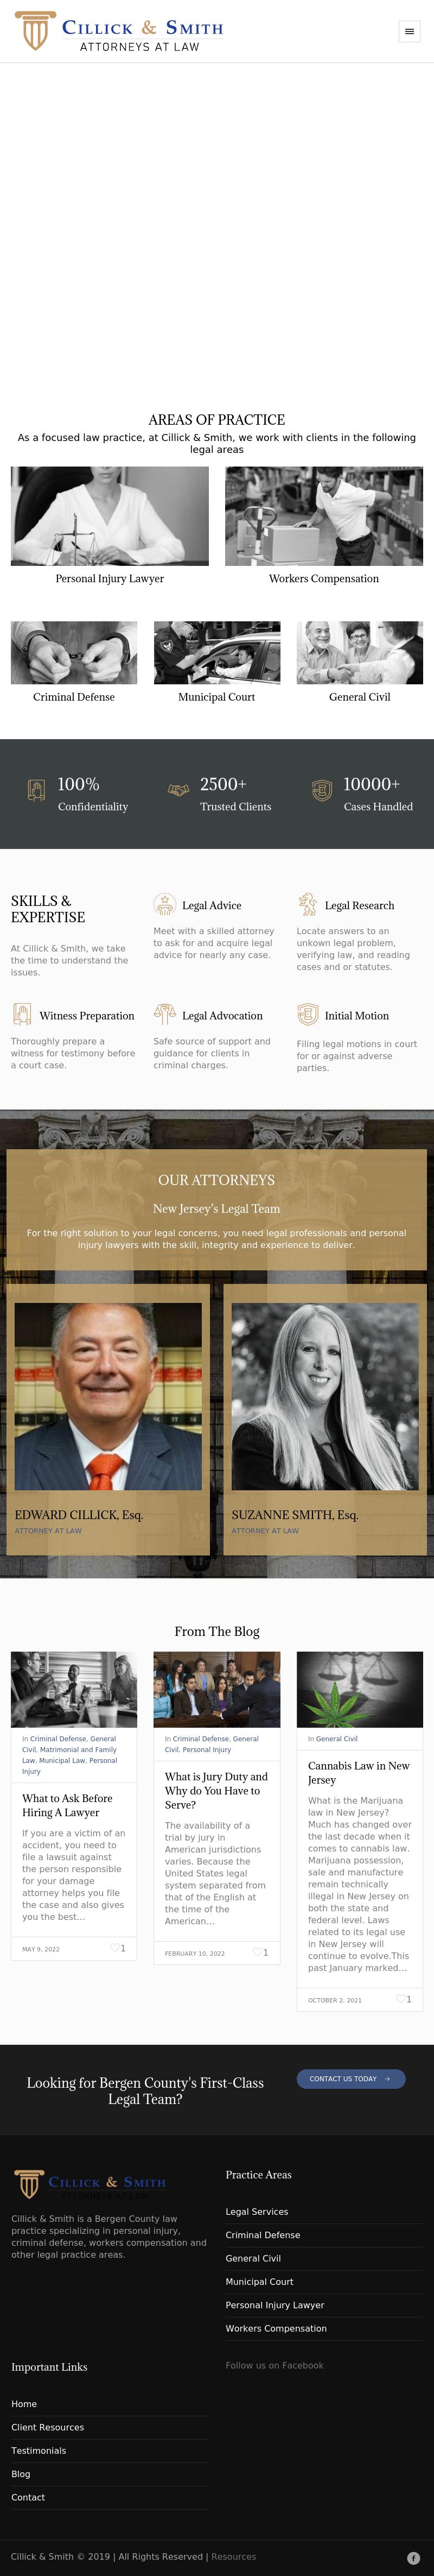 Law Office of Cillick and Smith - Newark NJ Lawyers